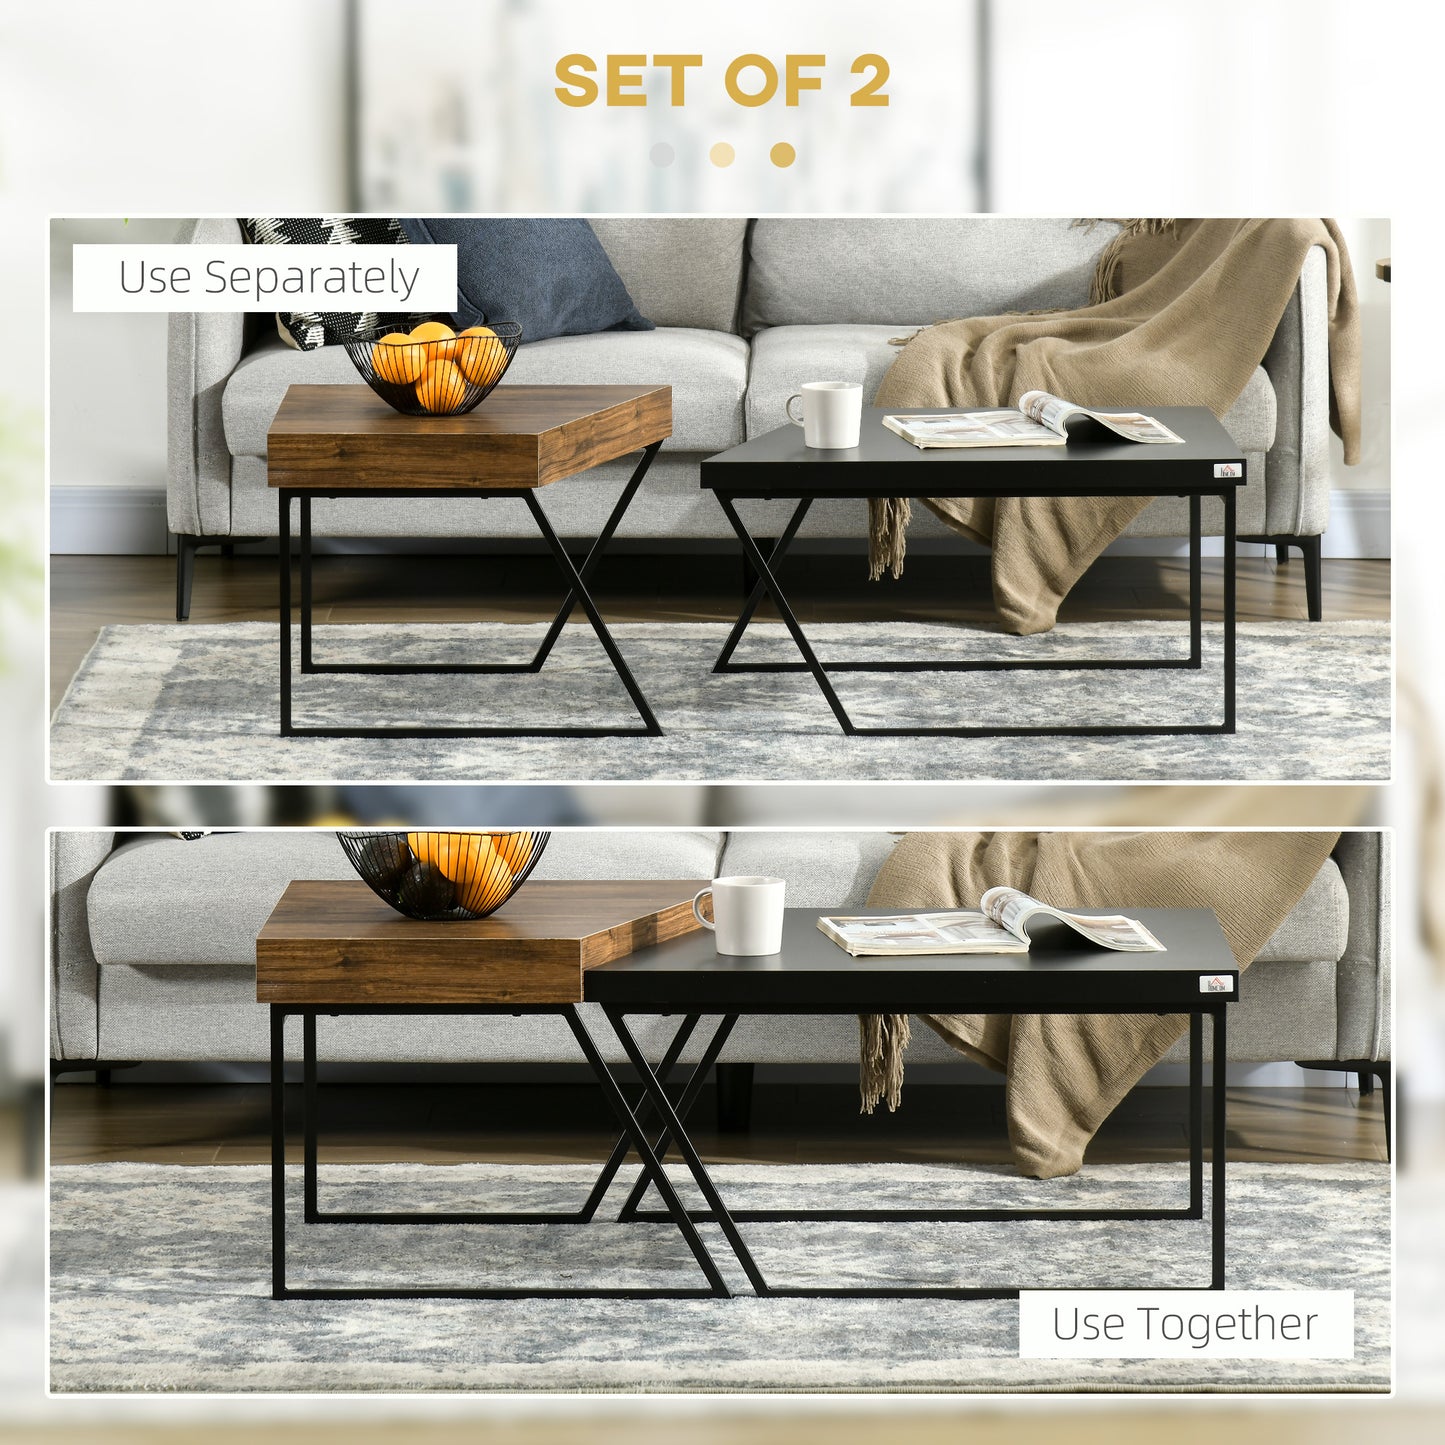 HOMCOM Coffee Table Set of 2, Geometric Coffee Table with Spacious Legroom, Steel Frame and Thick Tabletop, Industrial Coffee Tables for Living Room, Rustic Brown